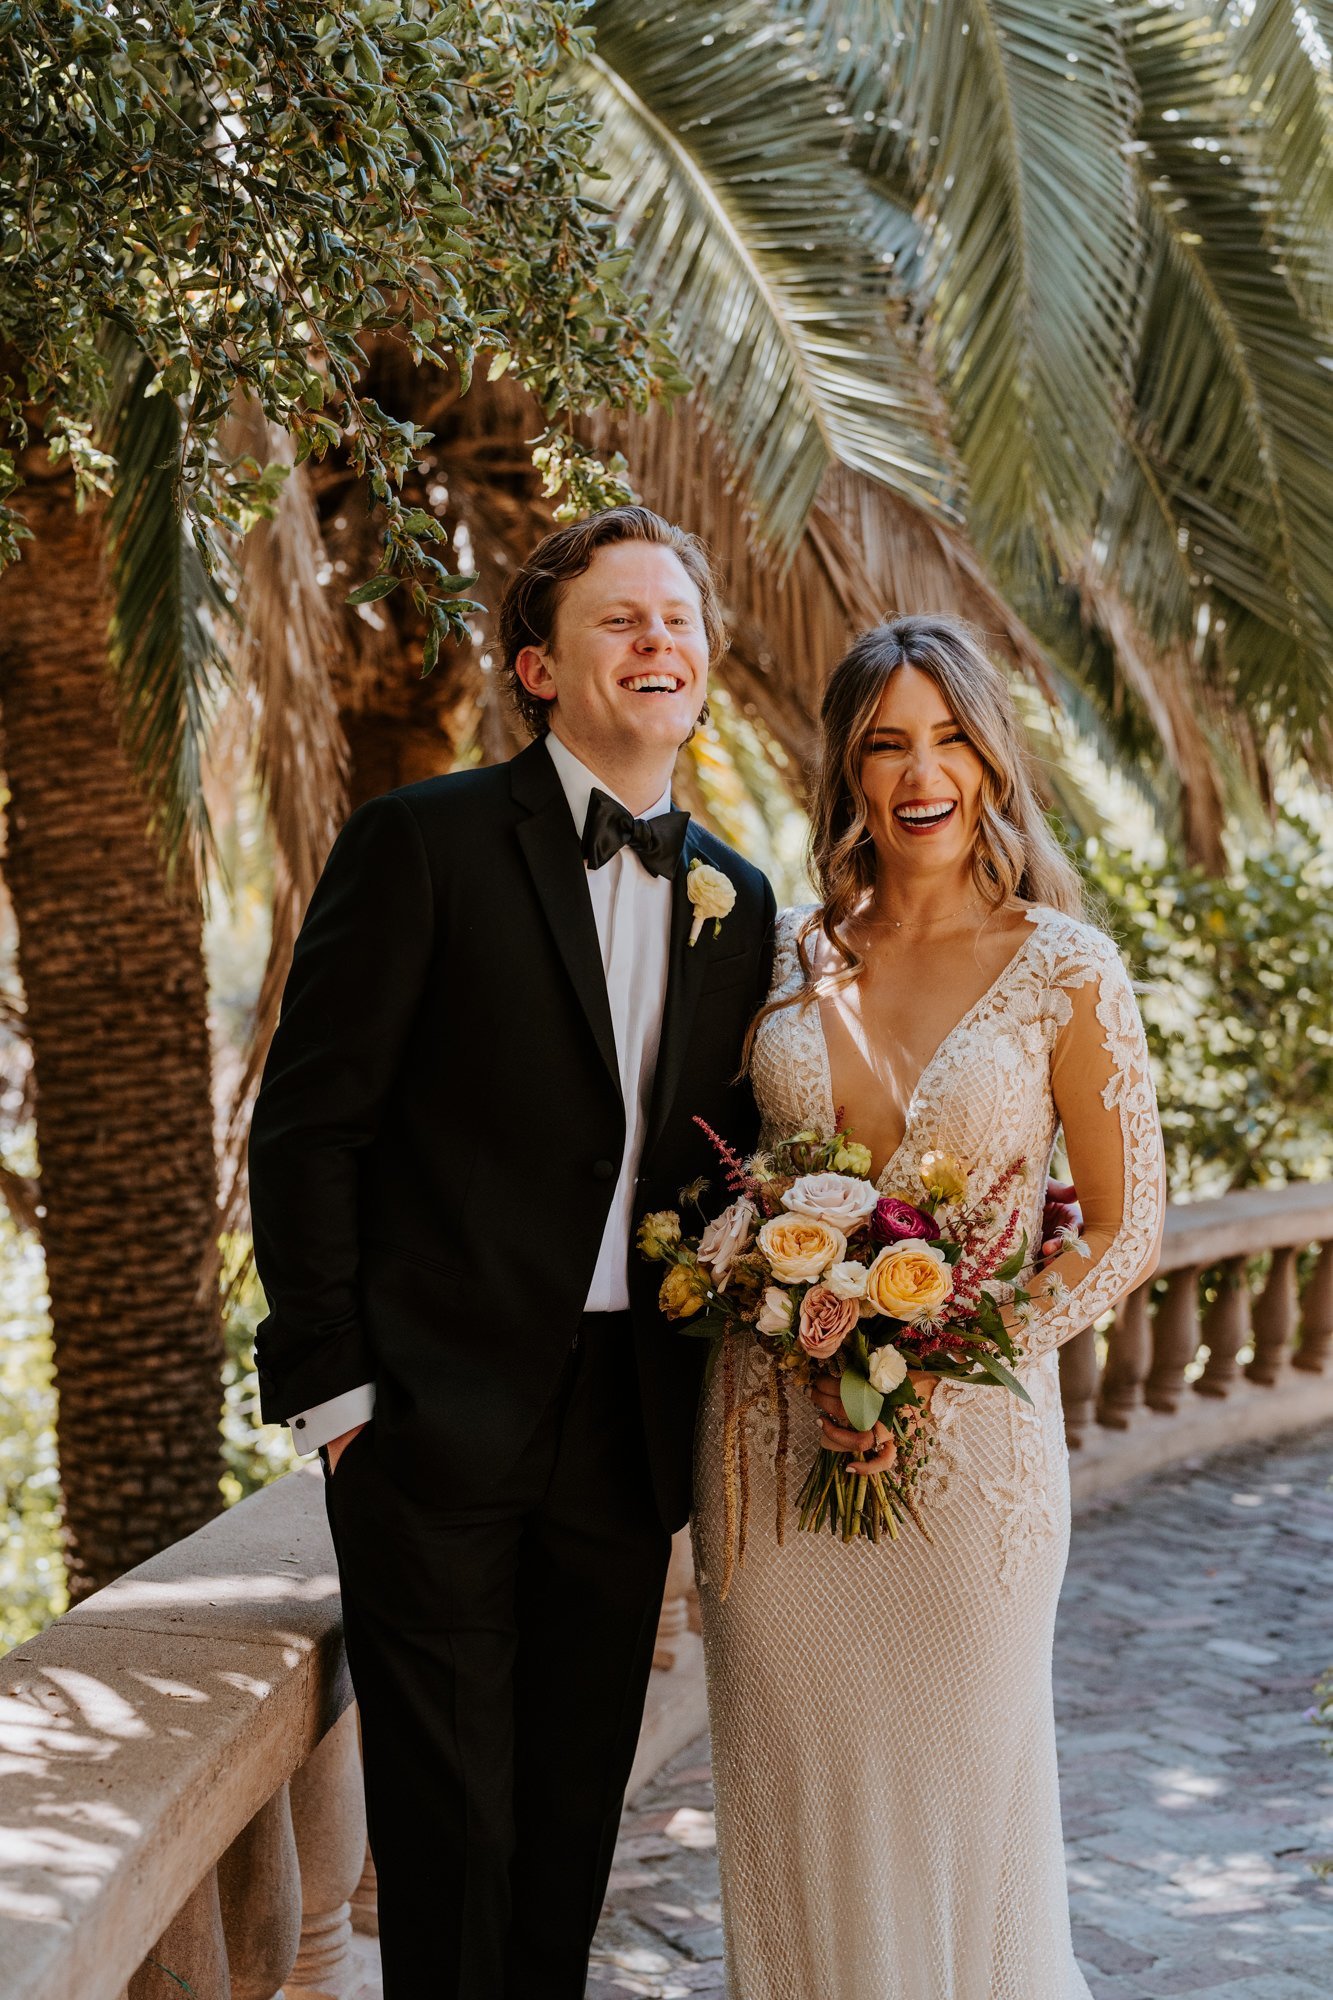 Candid laughing bride and groom portrait at The Houdini Estate wedding in los angeles, ca. Vibrant and candid los angeles wedding photography by Tida Svy